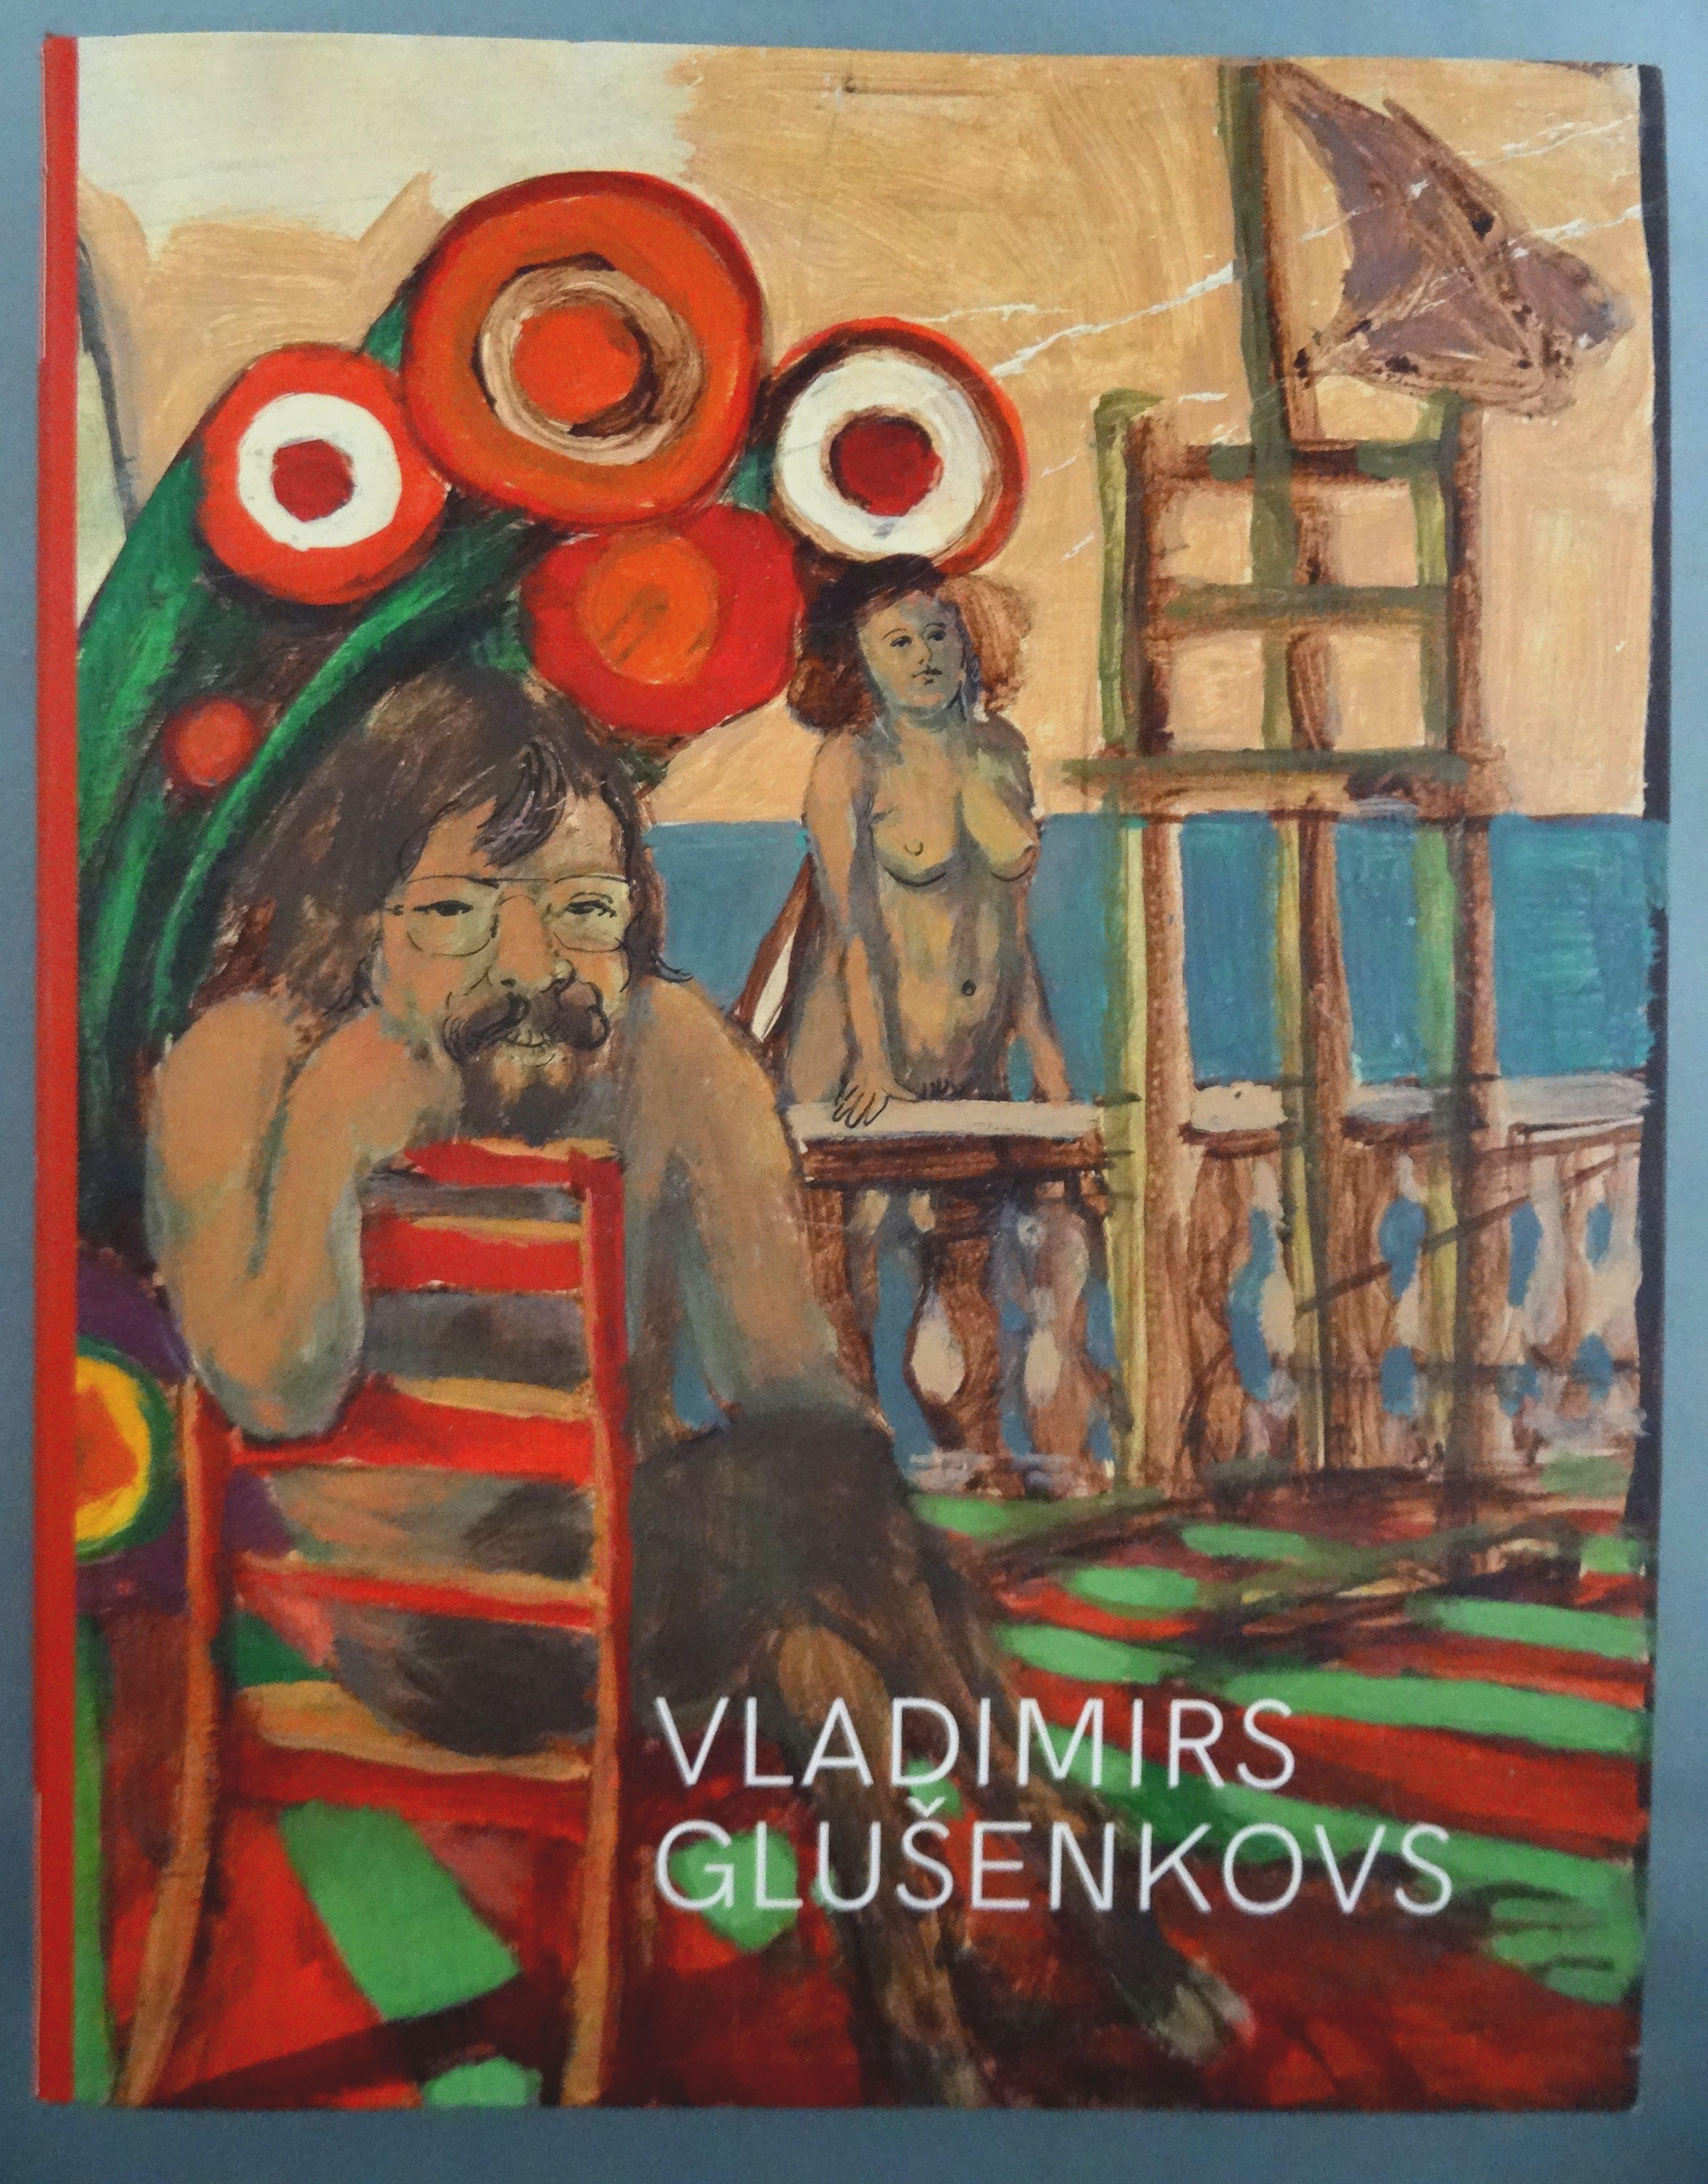 Lovers. 1968, cardboard, oil, 44x28 cm + gift book about artist Vladimirs Glušenkovs
published in the book 